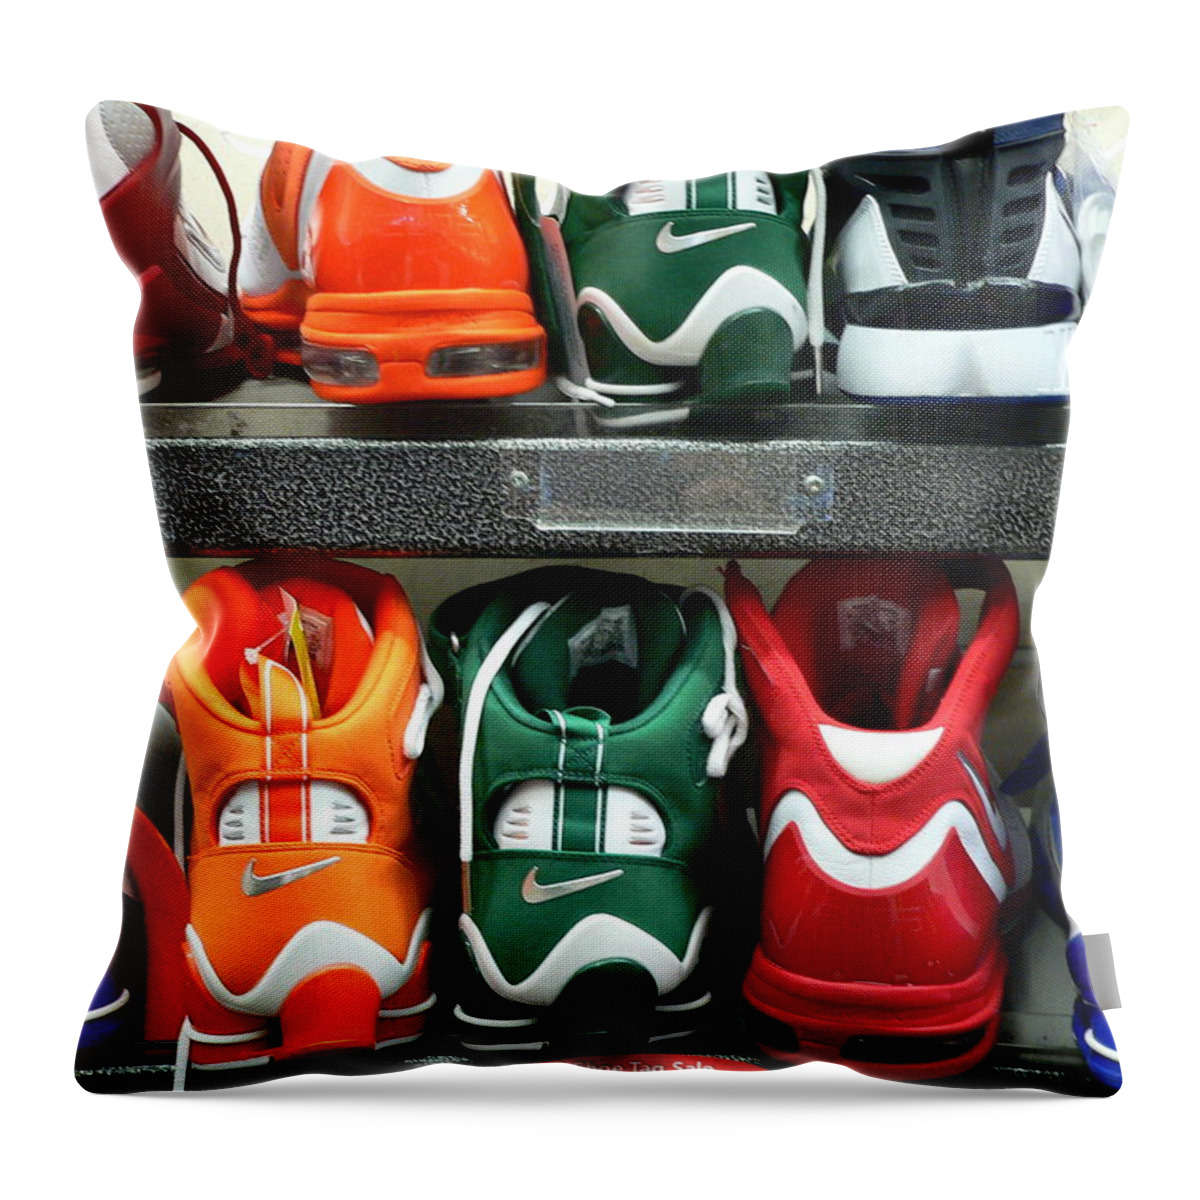 Colorful Shoes Throw Pillow featuring the photograph Colorful Shoes by Jeff Lowe